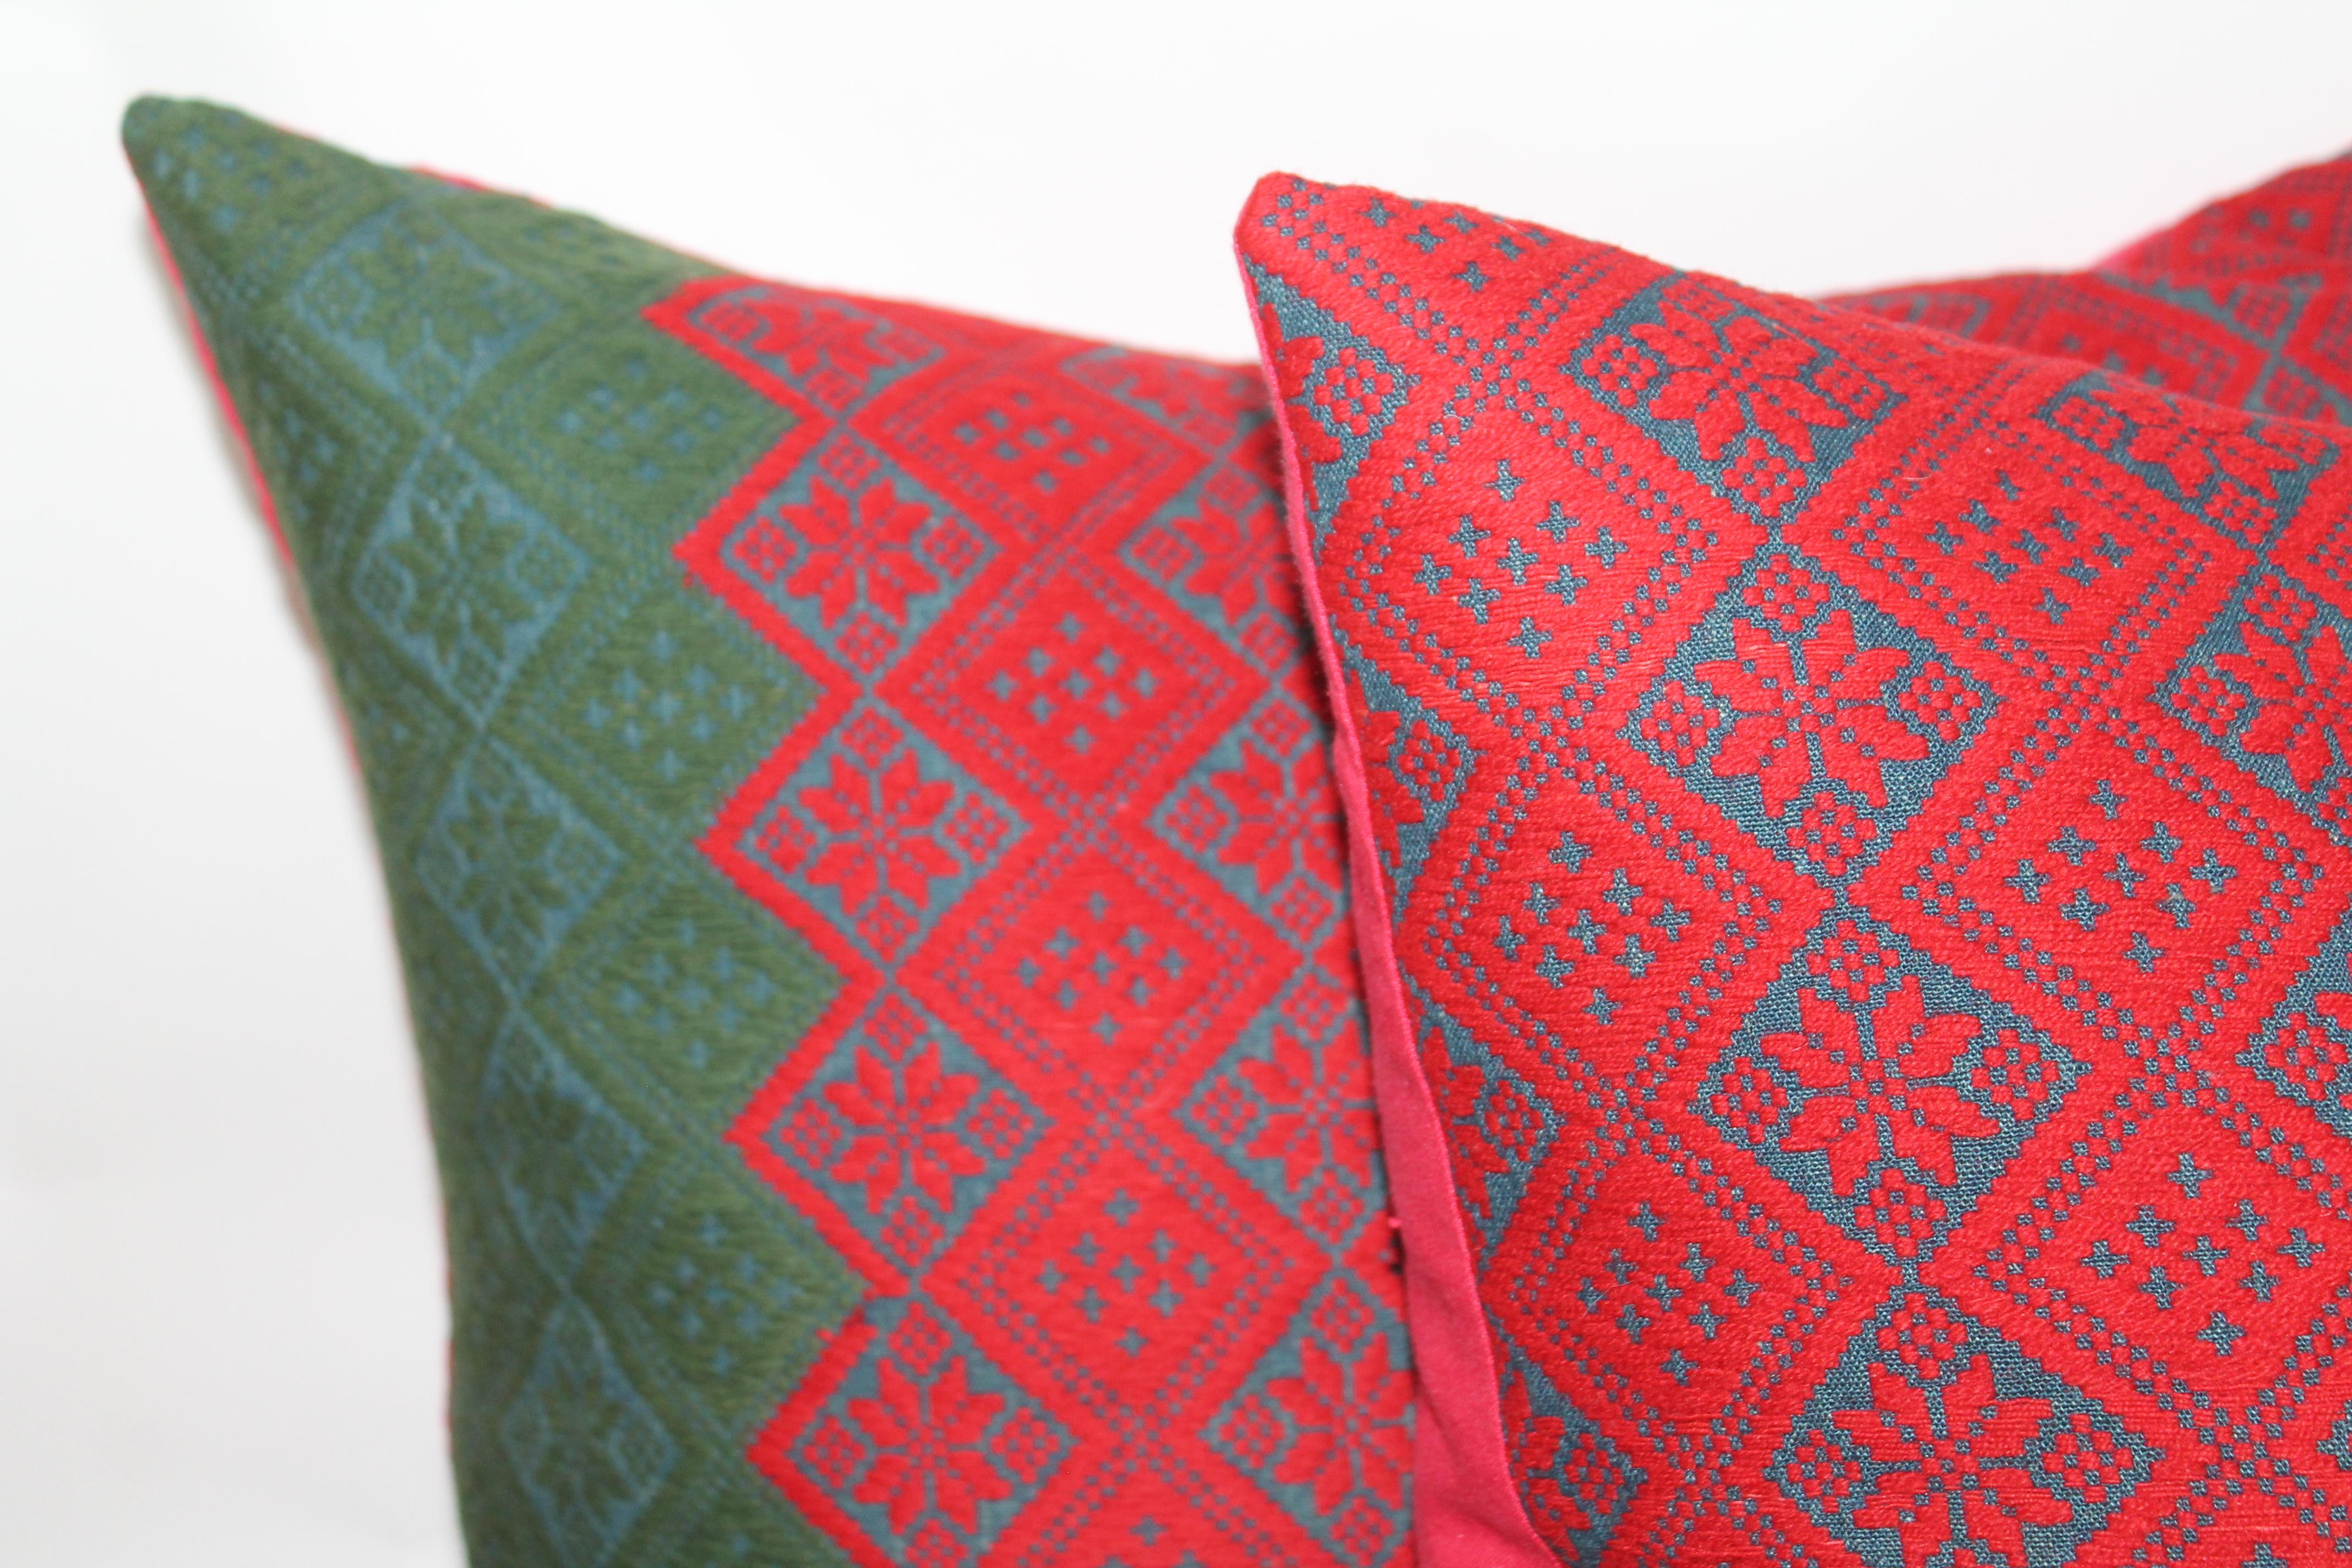 These amazing handwoven jacquard red and blue coverlet pillows have red cotton linen fabric on the backing. The condition is fantastic.